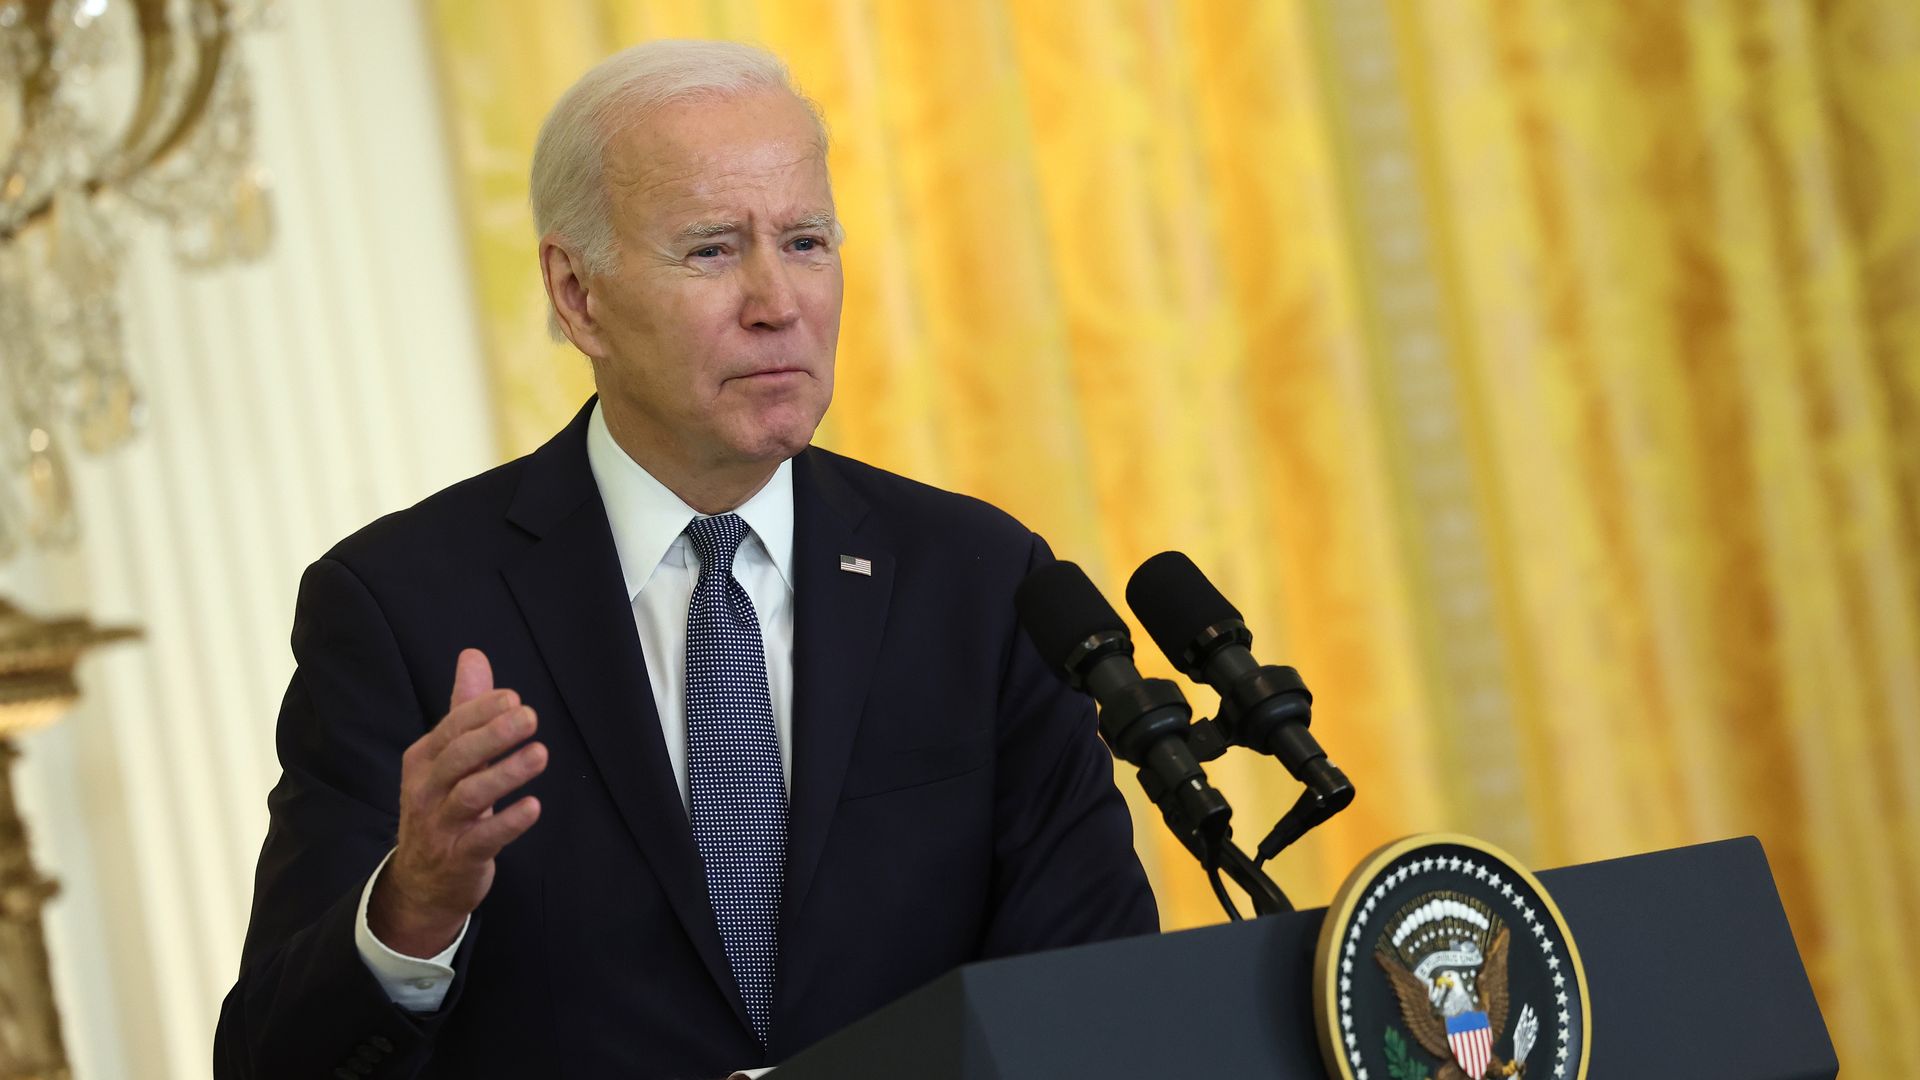 President Biden at a press conference at the White House on December 01.